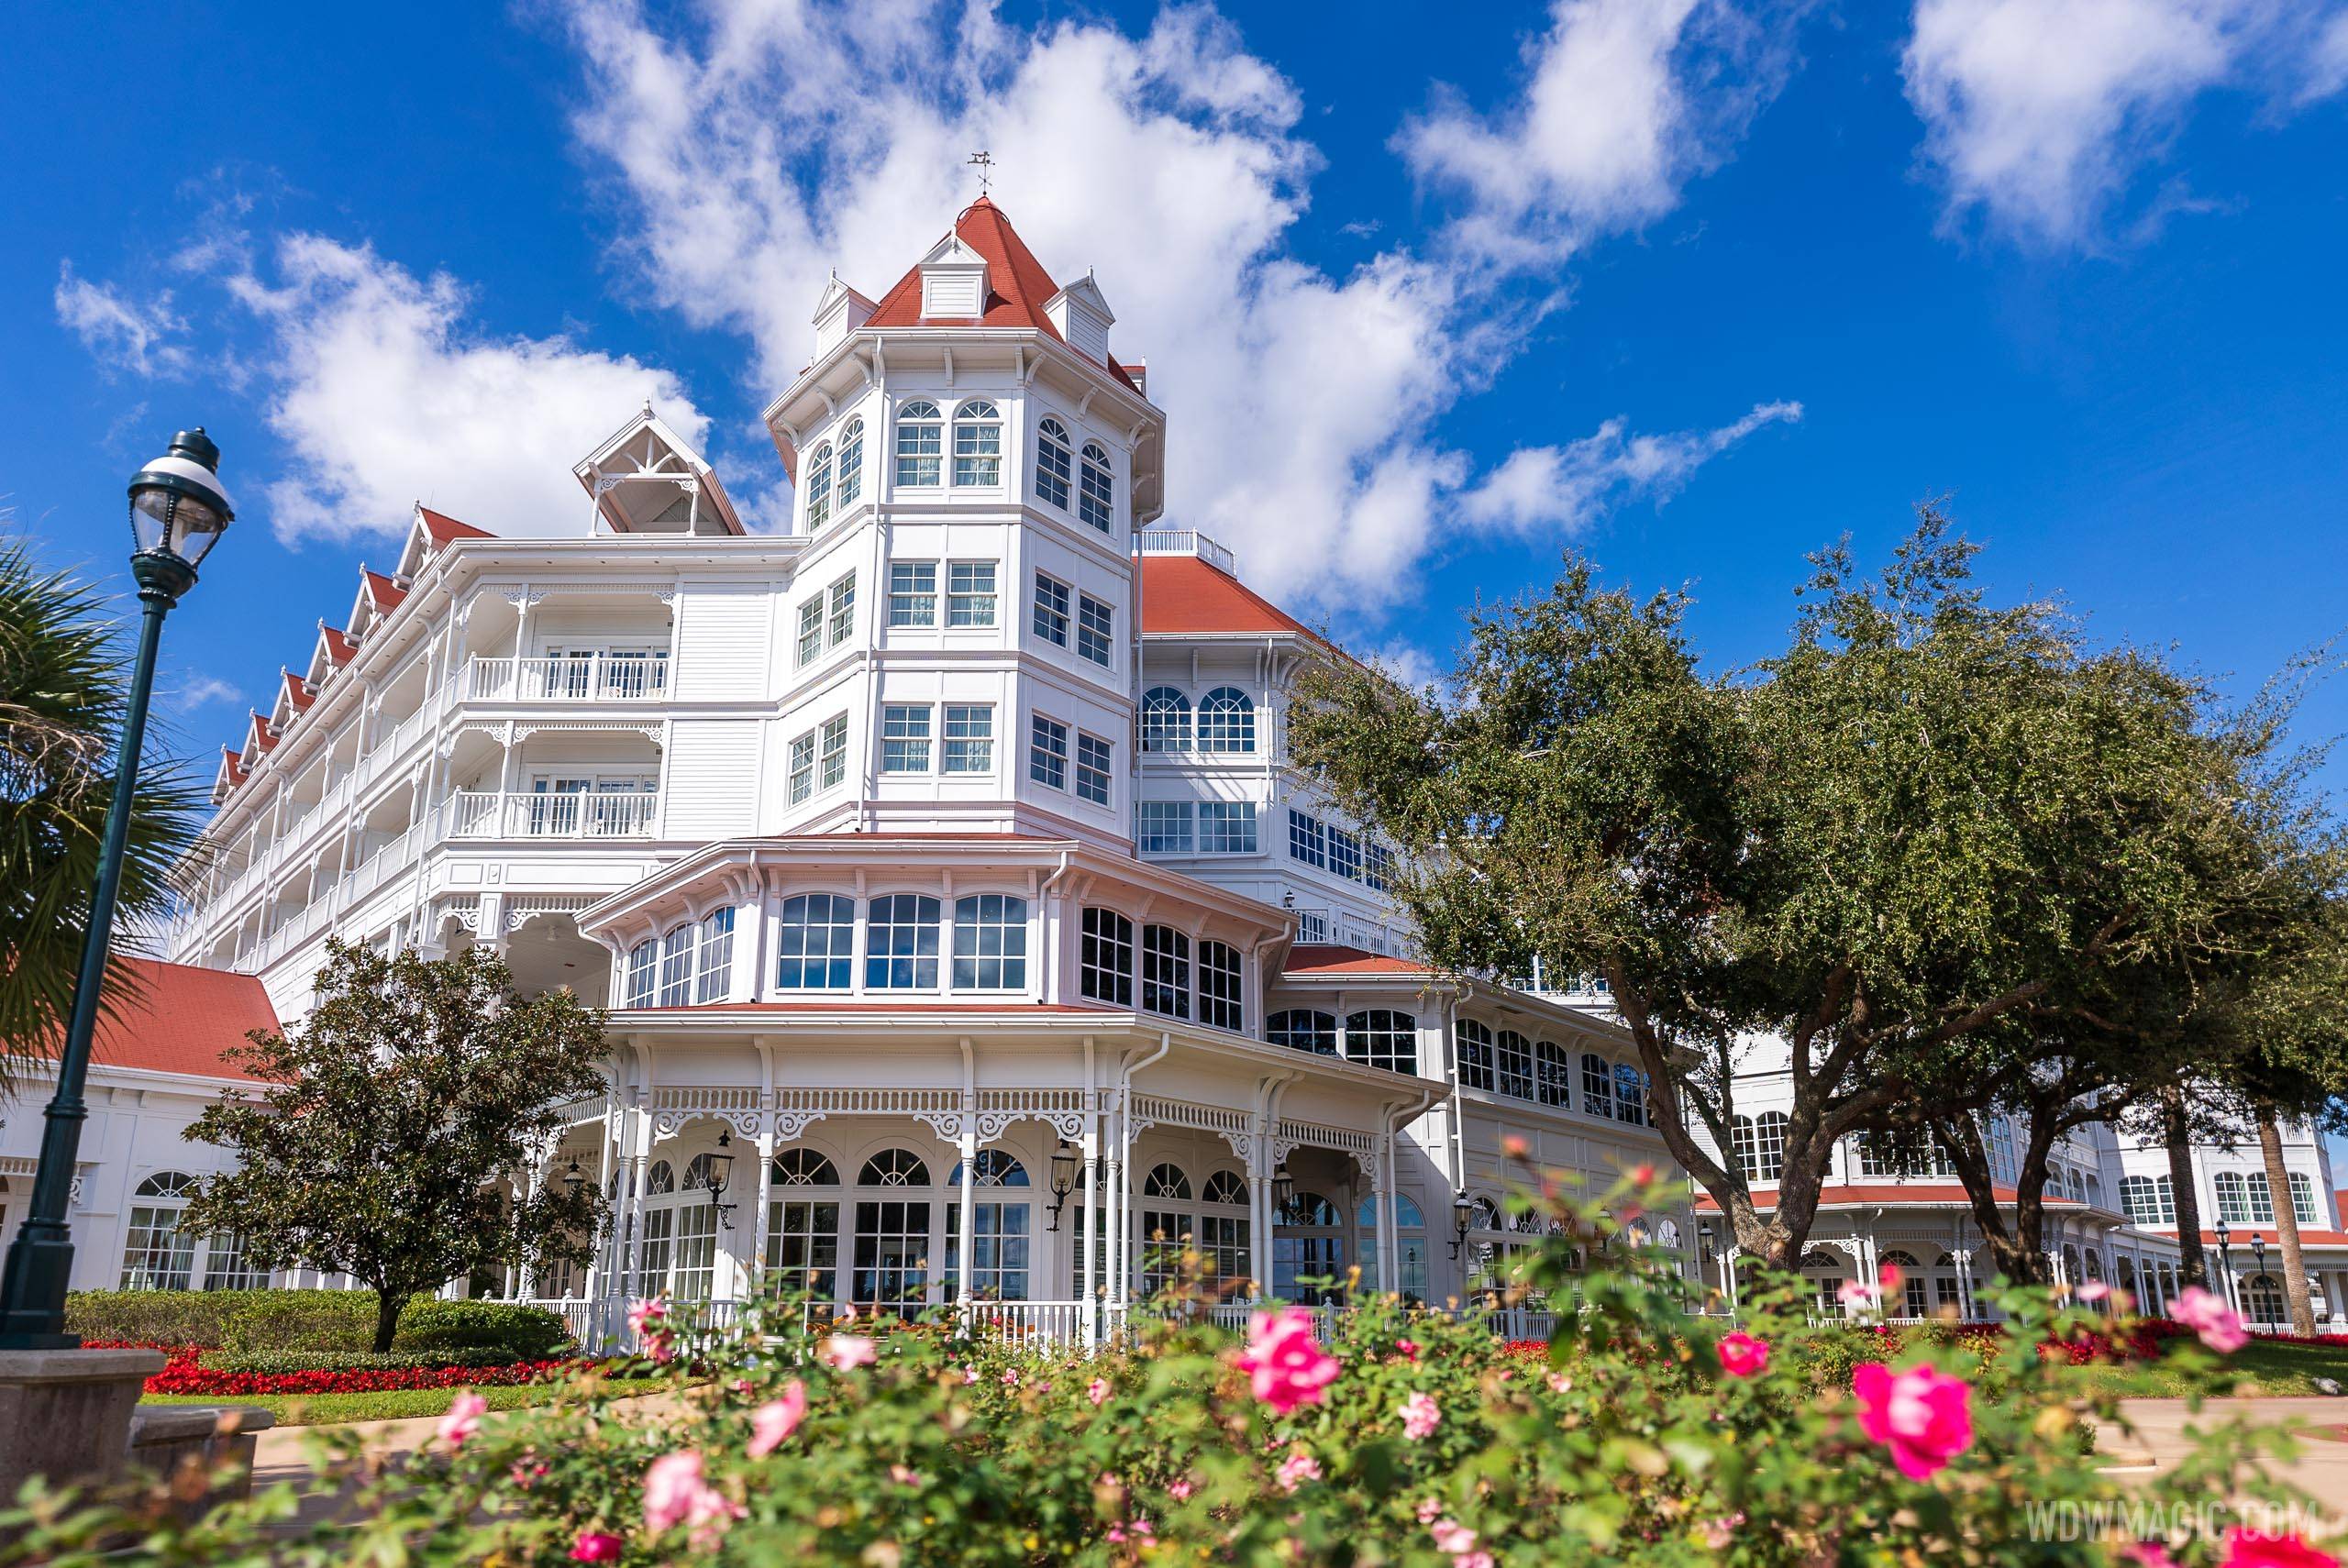 News 13 reports Trump will attend GOP Fundraiser at Disney's Grand Floridian Resort